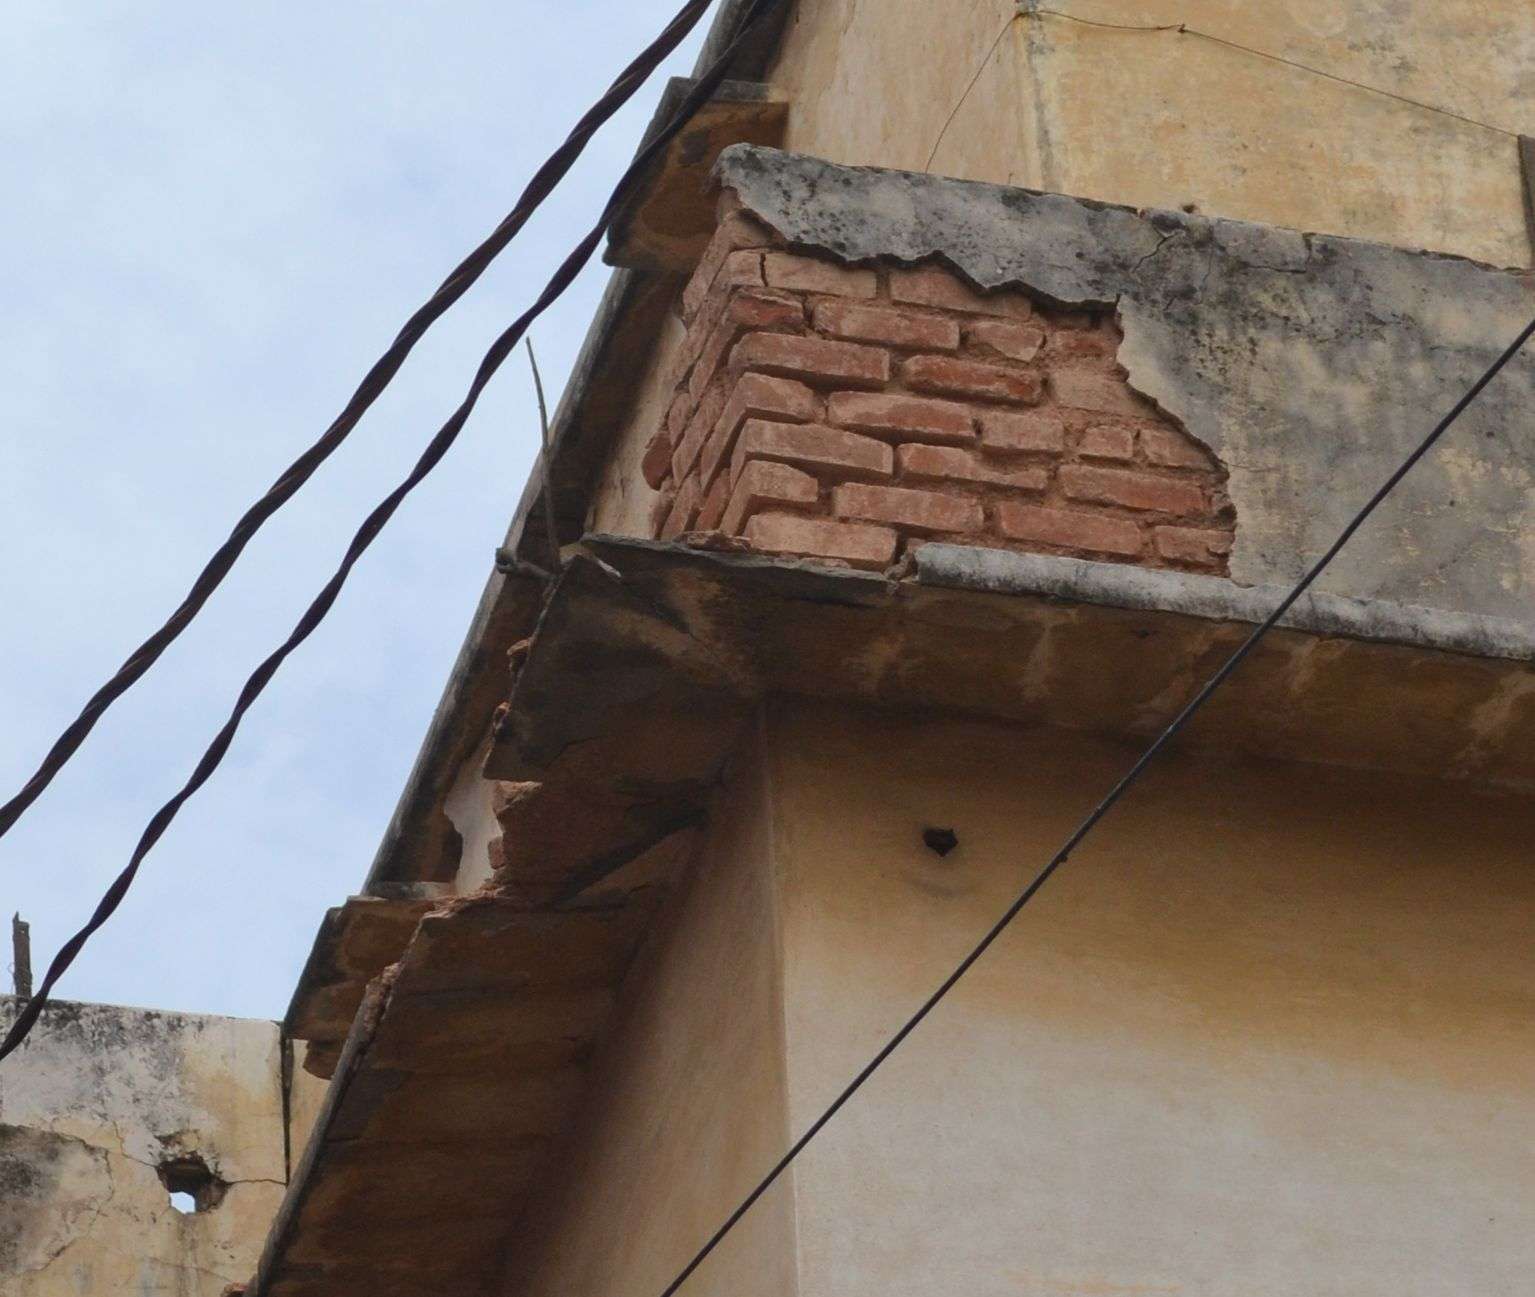 PLASTER OF OLD BUILDING FALL DOWN IN ALWAR